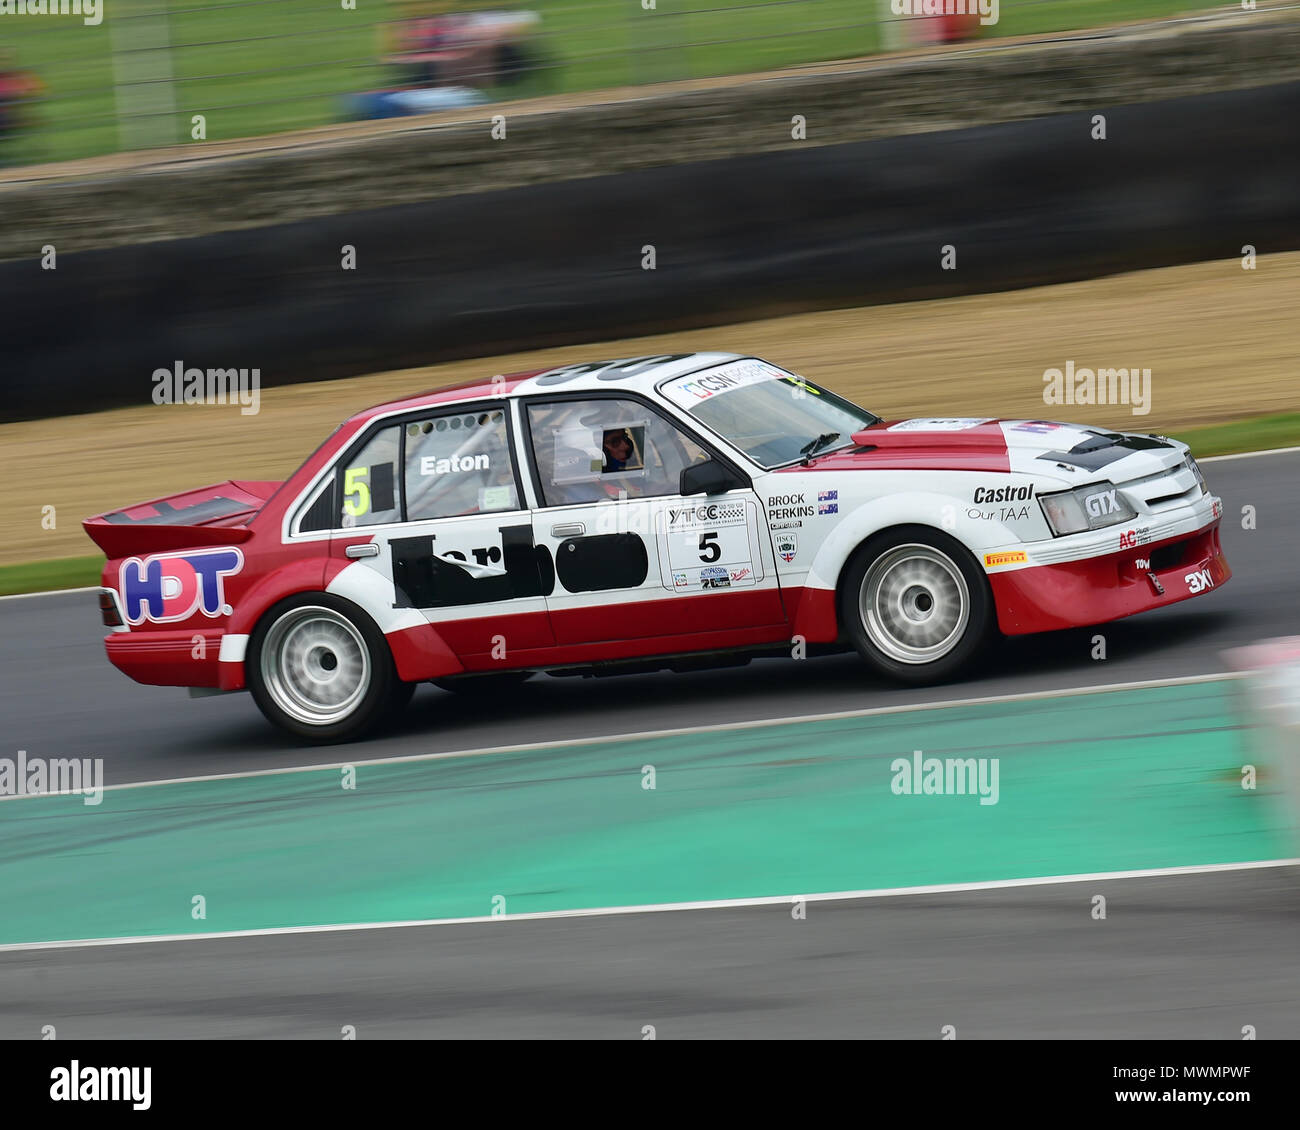 Paul Eaton, Holden Commodore, CSN Groep, Youngtimer Touring Car Challenge,  Masters Historic Festival, Brands Hatch, Sunday 27th May 2018, Brands Hatch  Stock Photo - Alamy